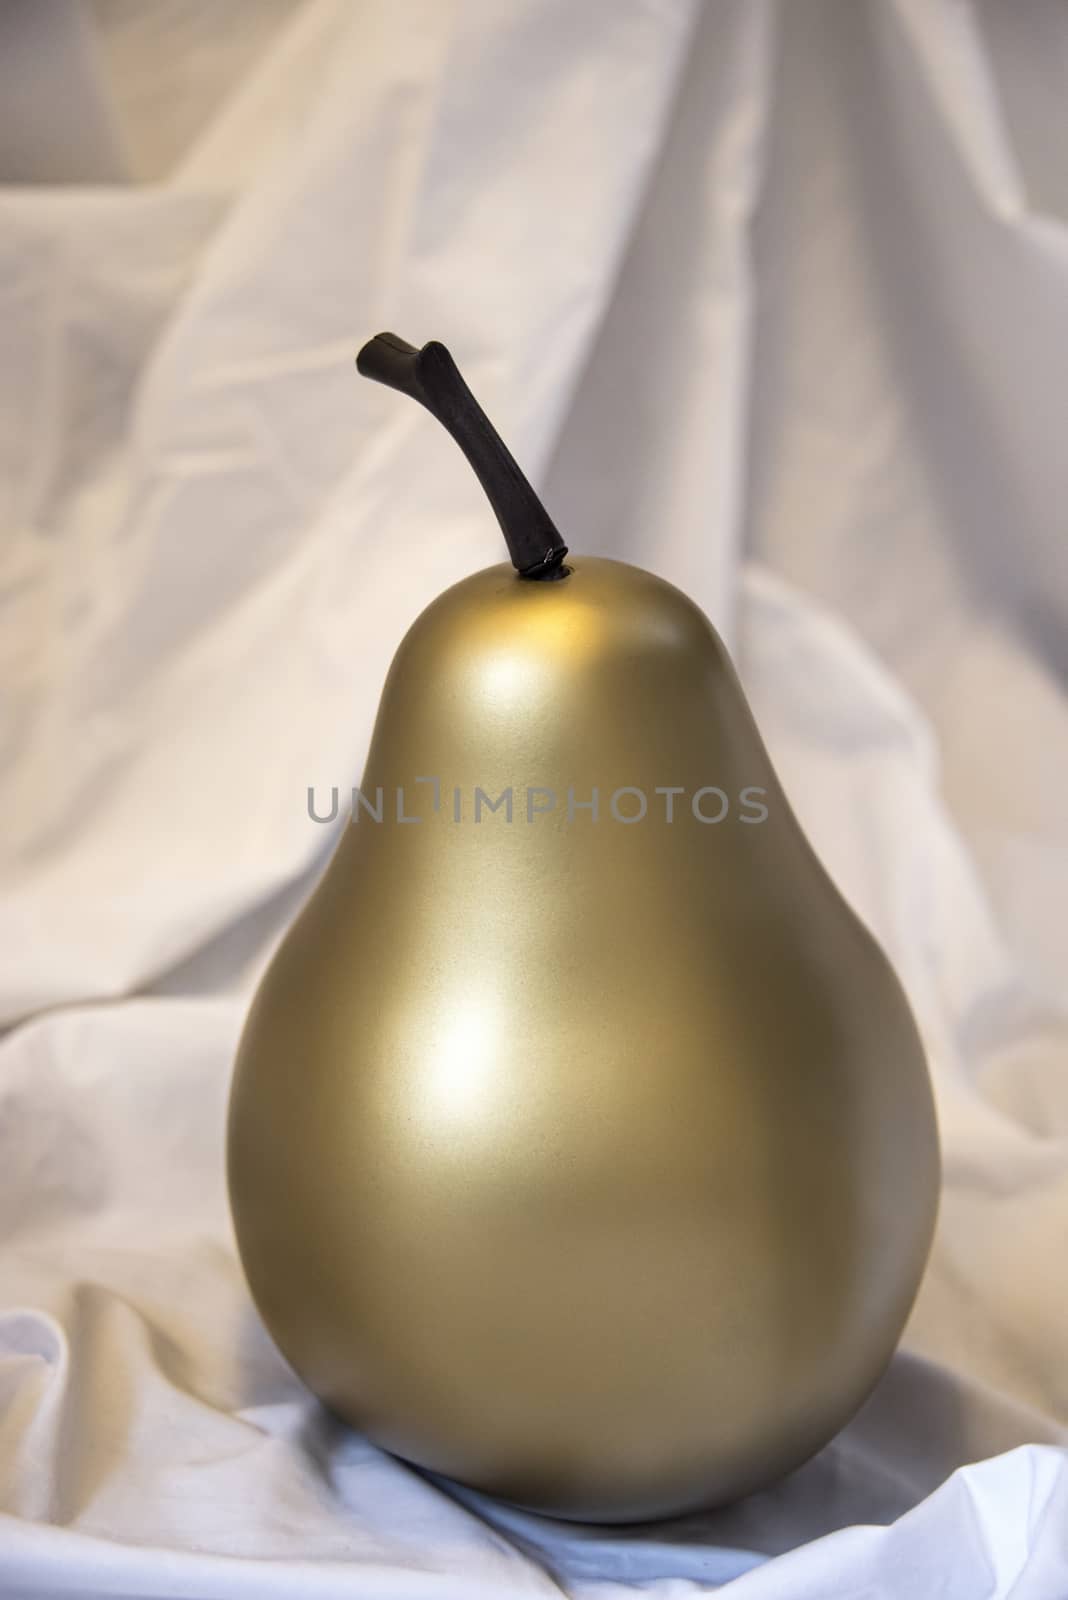 UK, October 2017: 	Gold / Golden Pear on crumpled white fabric background